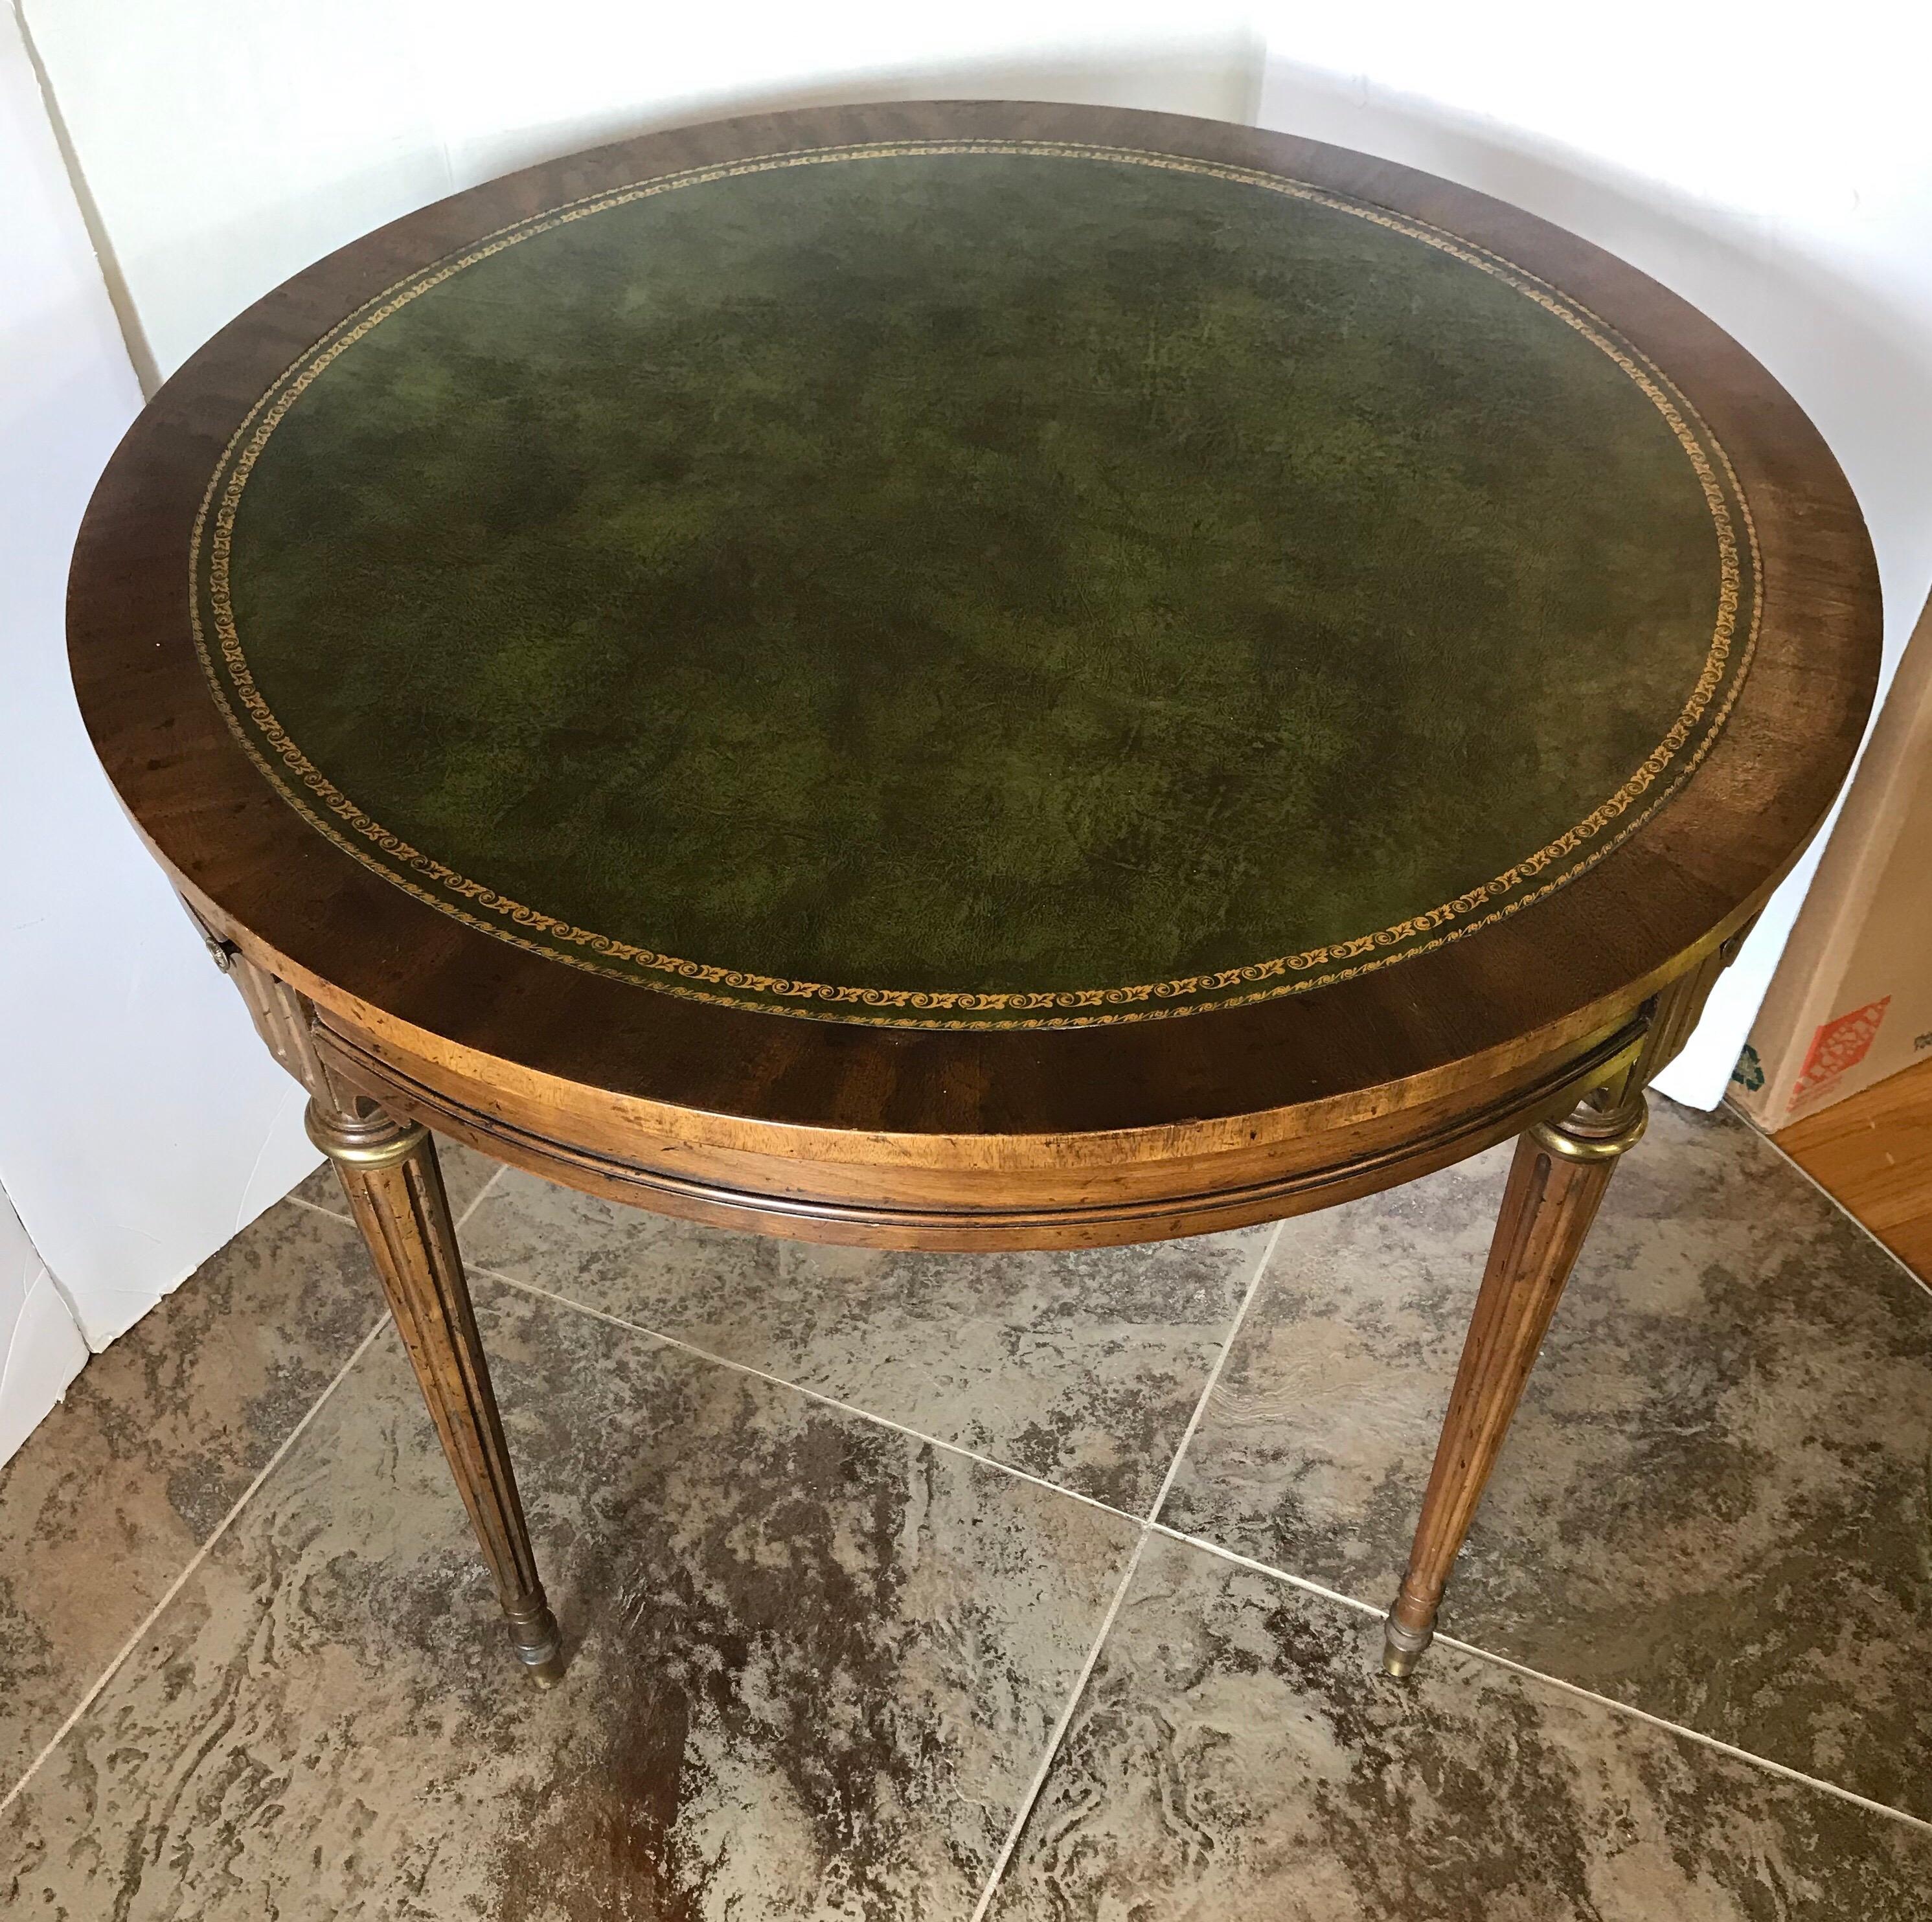 Round mahogany game table has a leather top in dark green with decorative gold border. Above each leg is a pull out drink holder with a brass pull. The table is supported by fluted tapered legs each having a round brass mount.